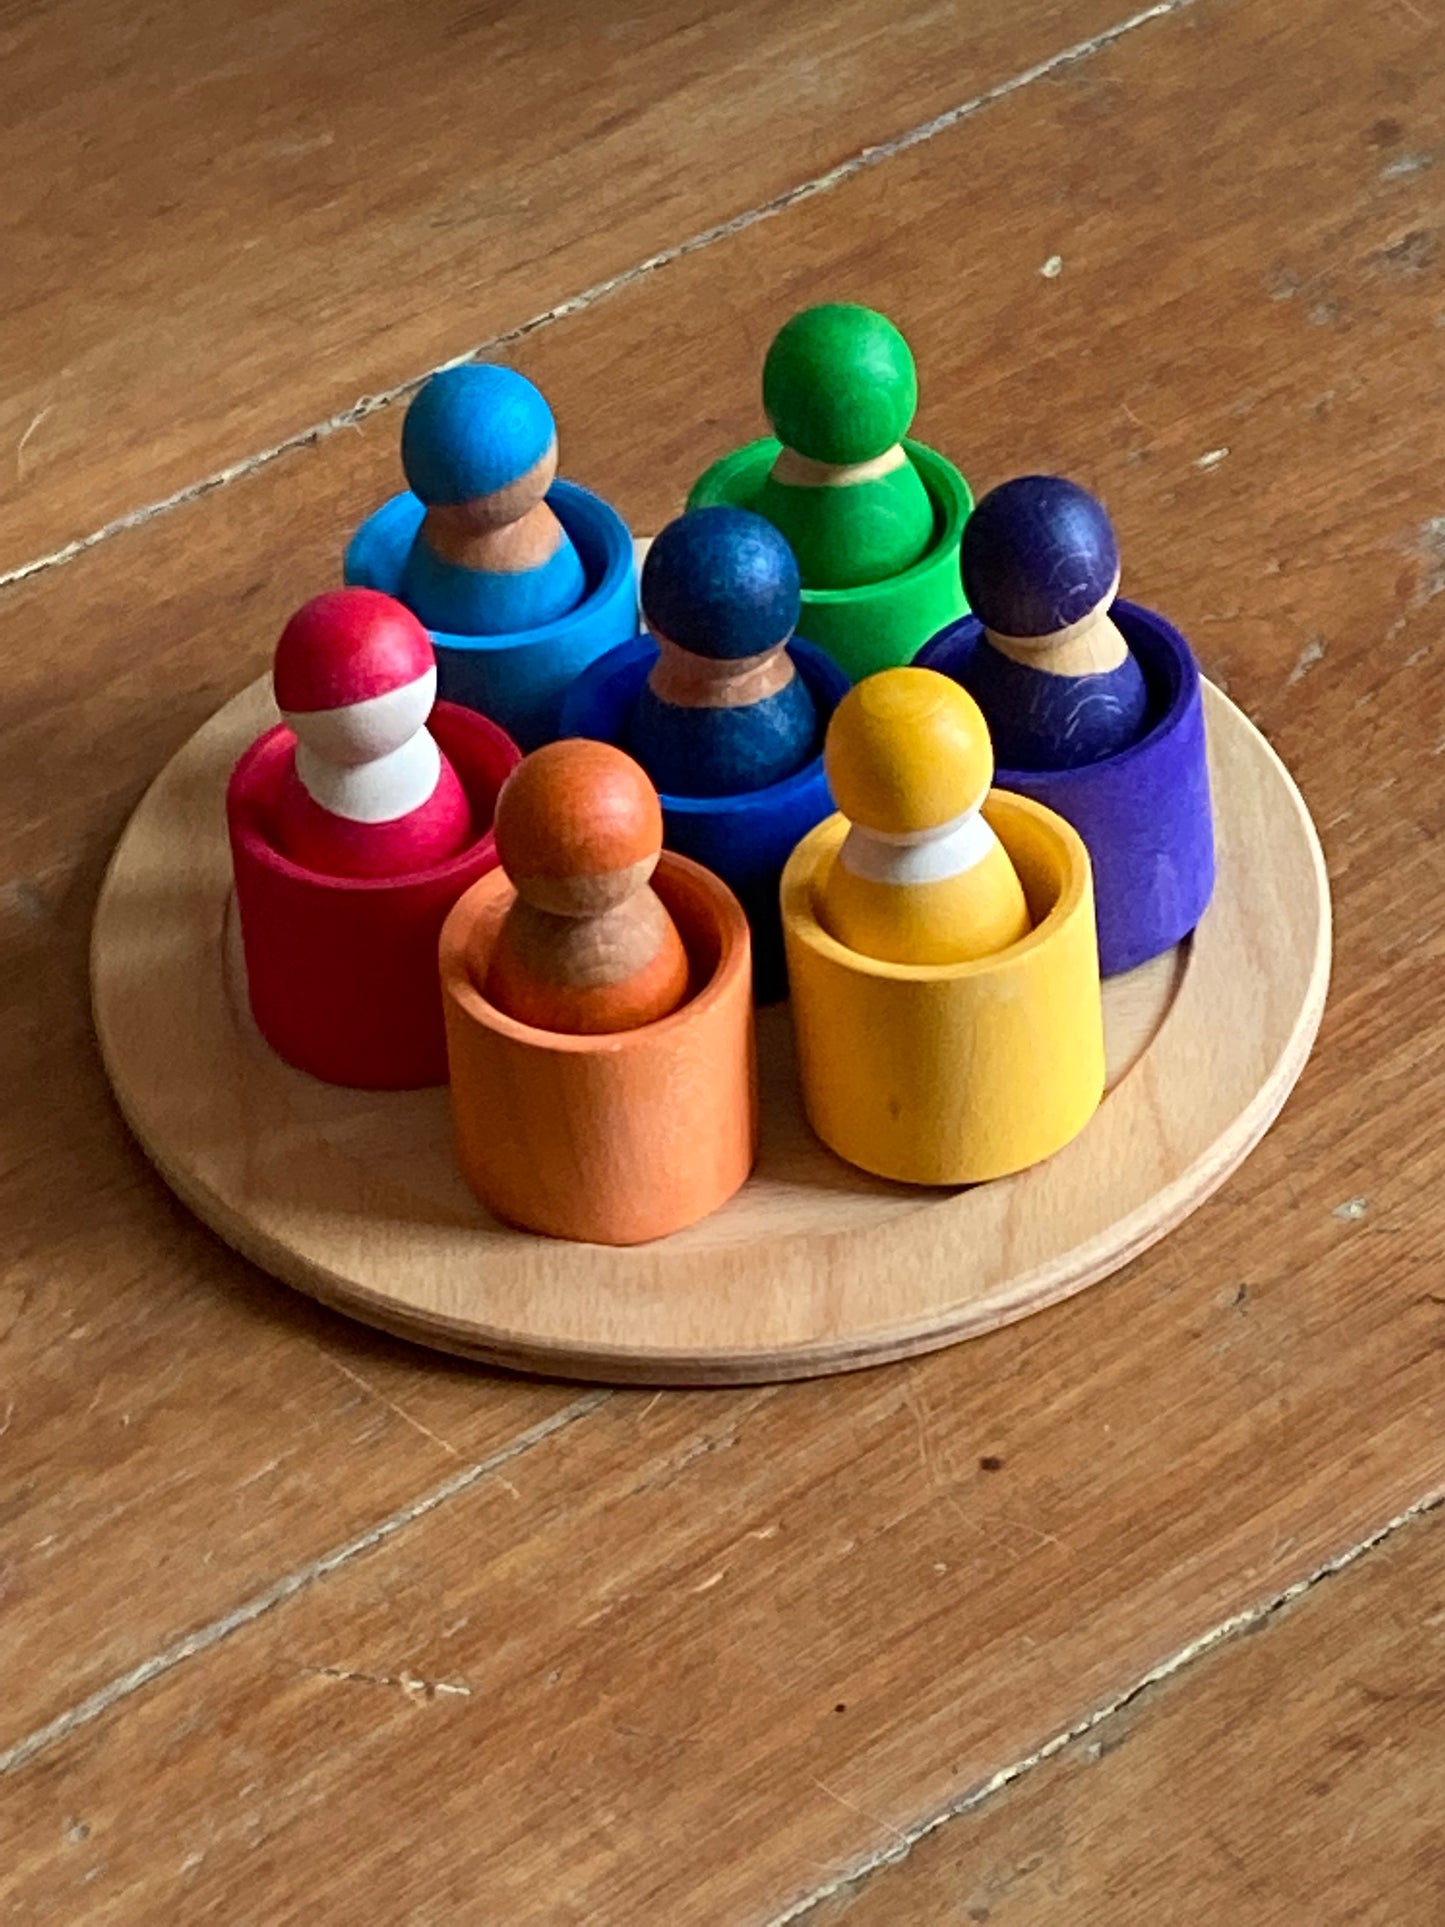 Wooden Toy - Grimm's RAINBOW FRIENDS in RAINBOW BOWLS, set of 7!